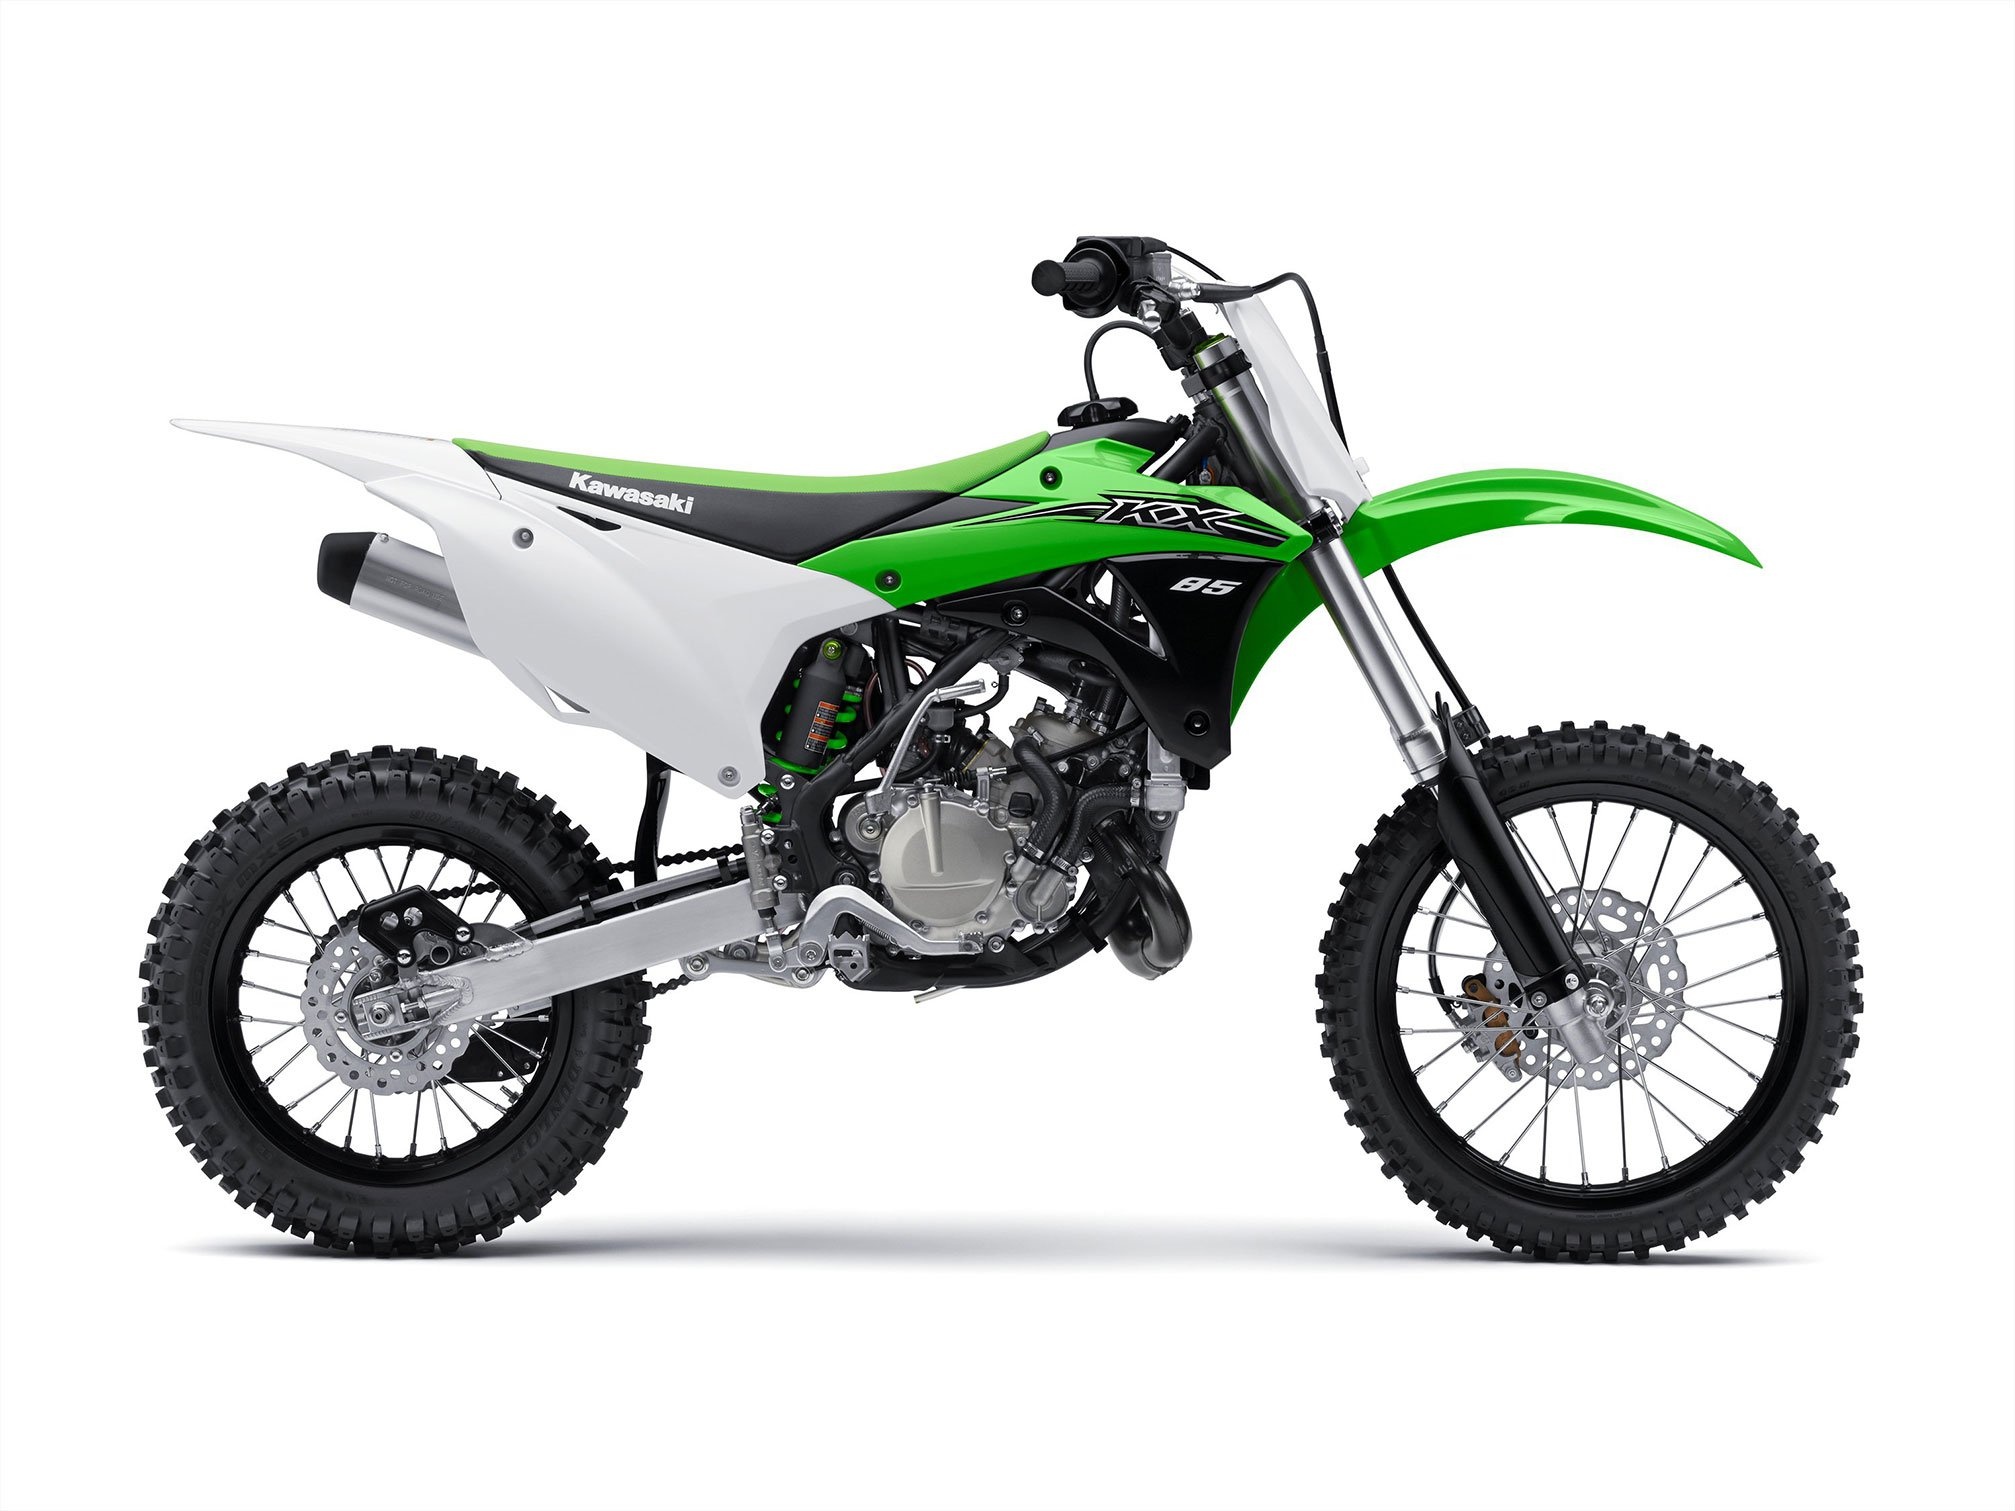 Kawasaki KX85 motocross, Speed and power, Thrilling dirtbike action, Extreme off-road performance, 2020x1520 HD Desktop